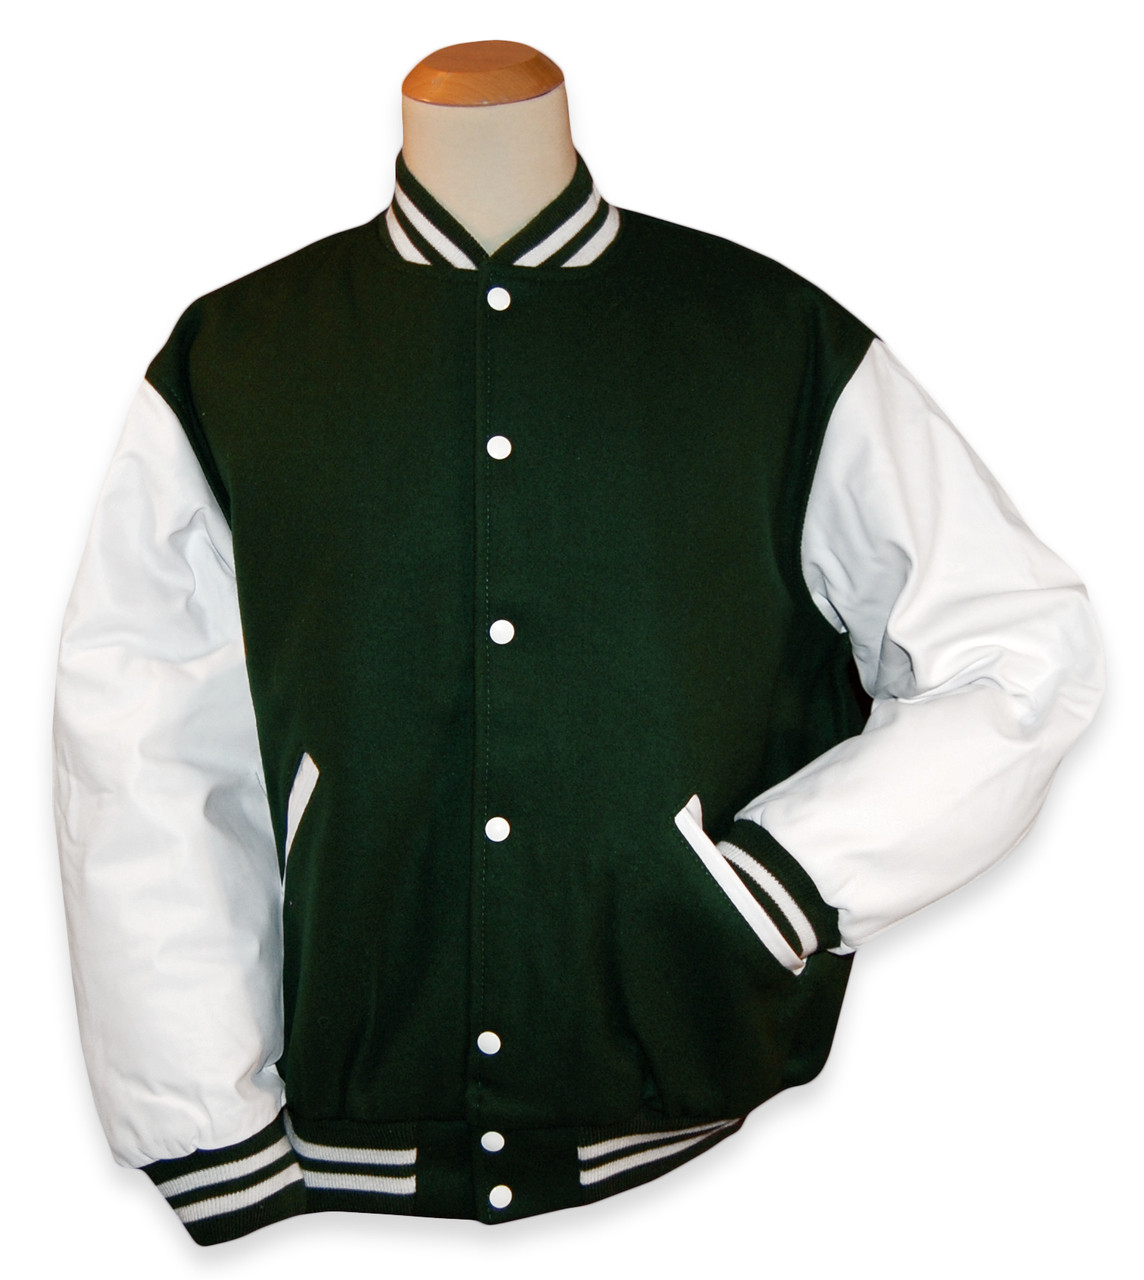 FarmHouse Varsity Letterman Jacket with Varsity Letters and Crest, Forest  Green/White